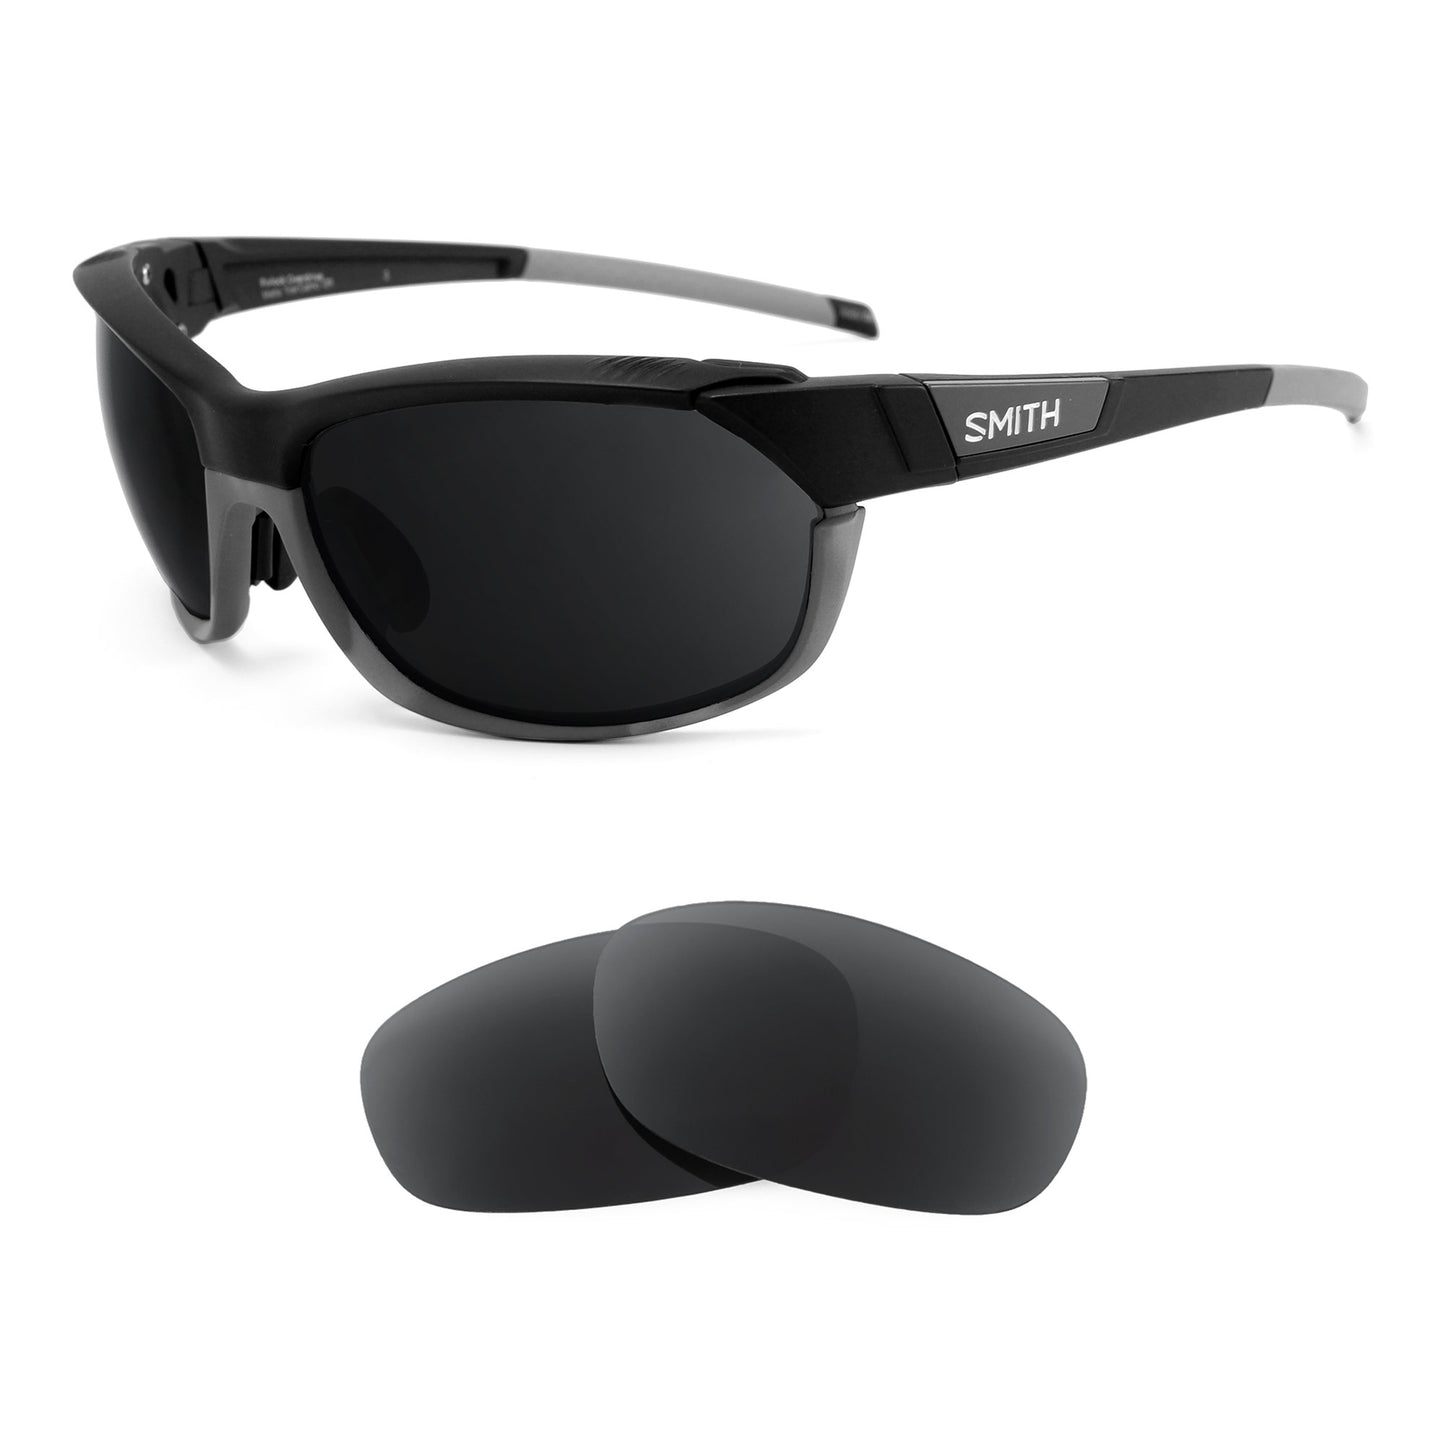 Smith Pivlock Overdrive sunglasses with replacement lenses